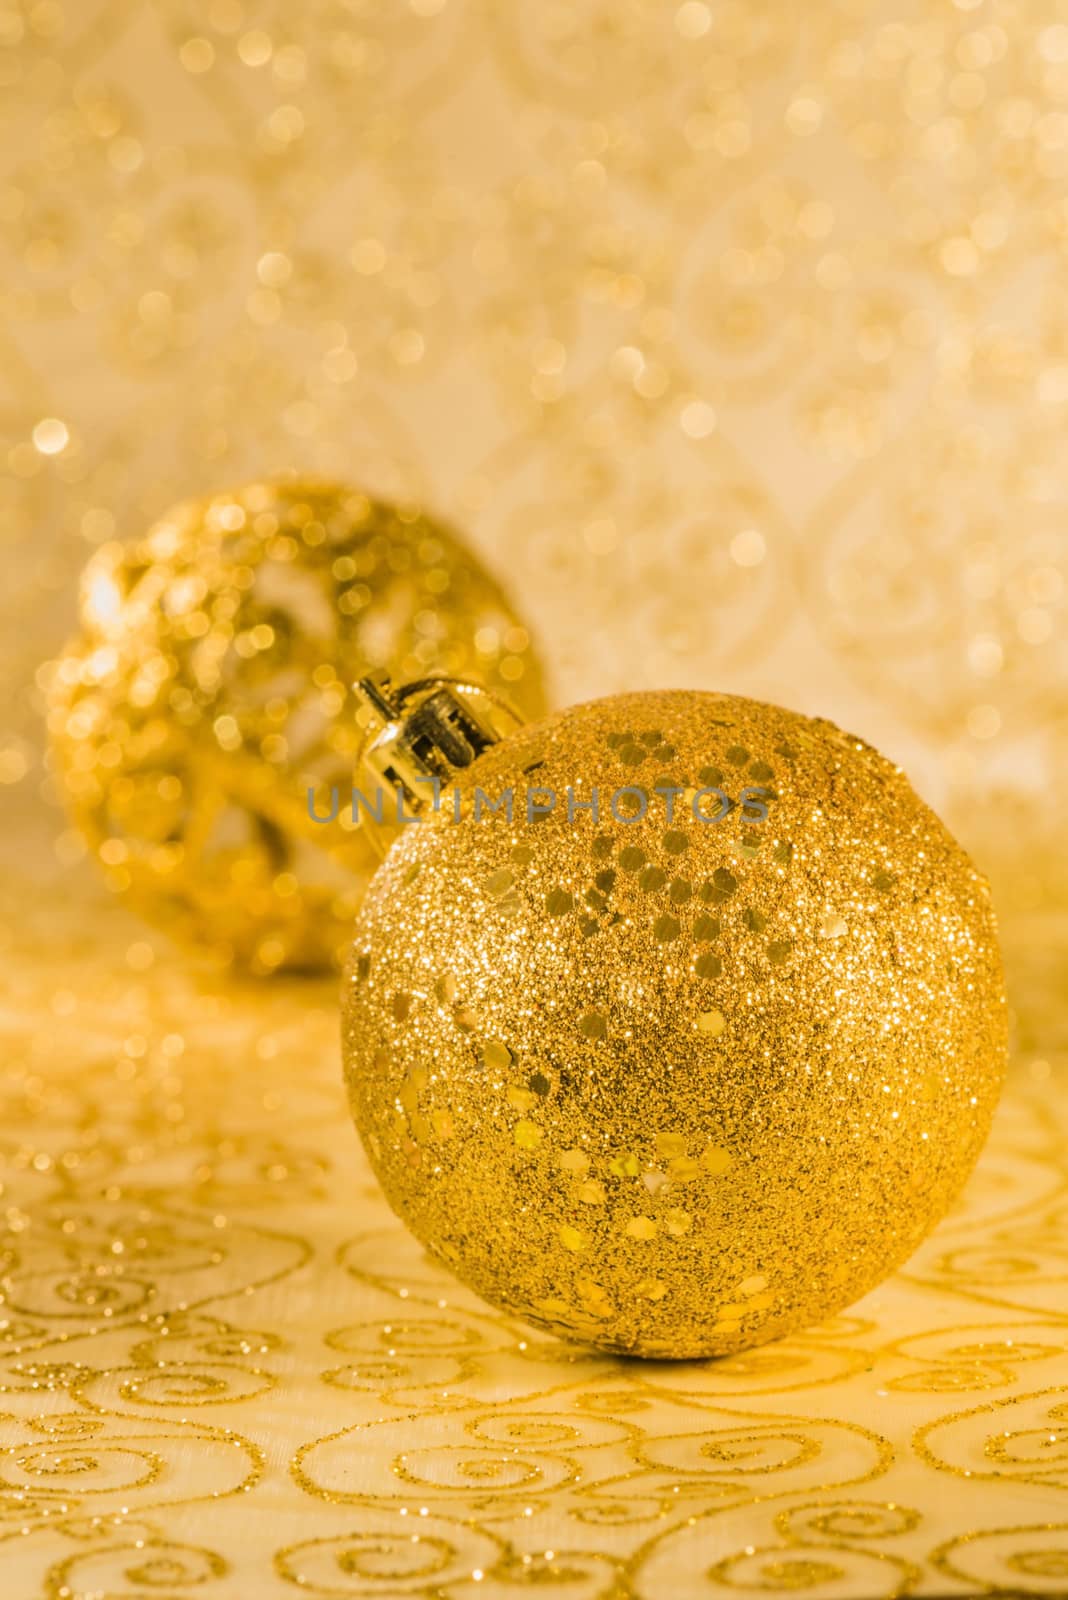 Golden chtistmas decorations by alexandrum01